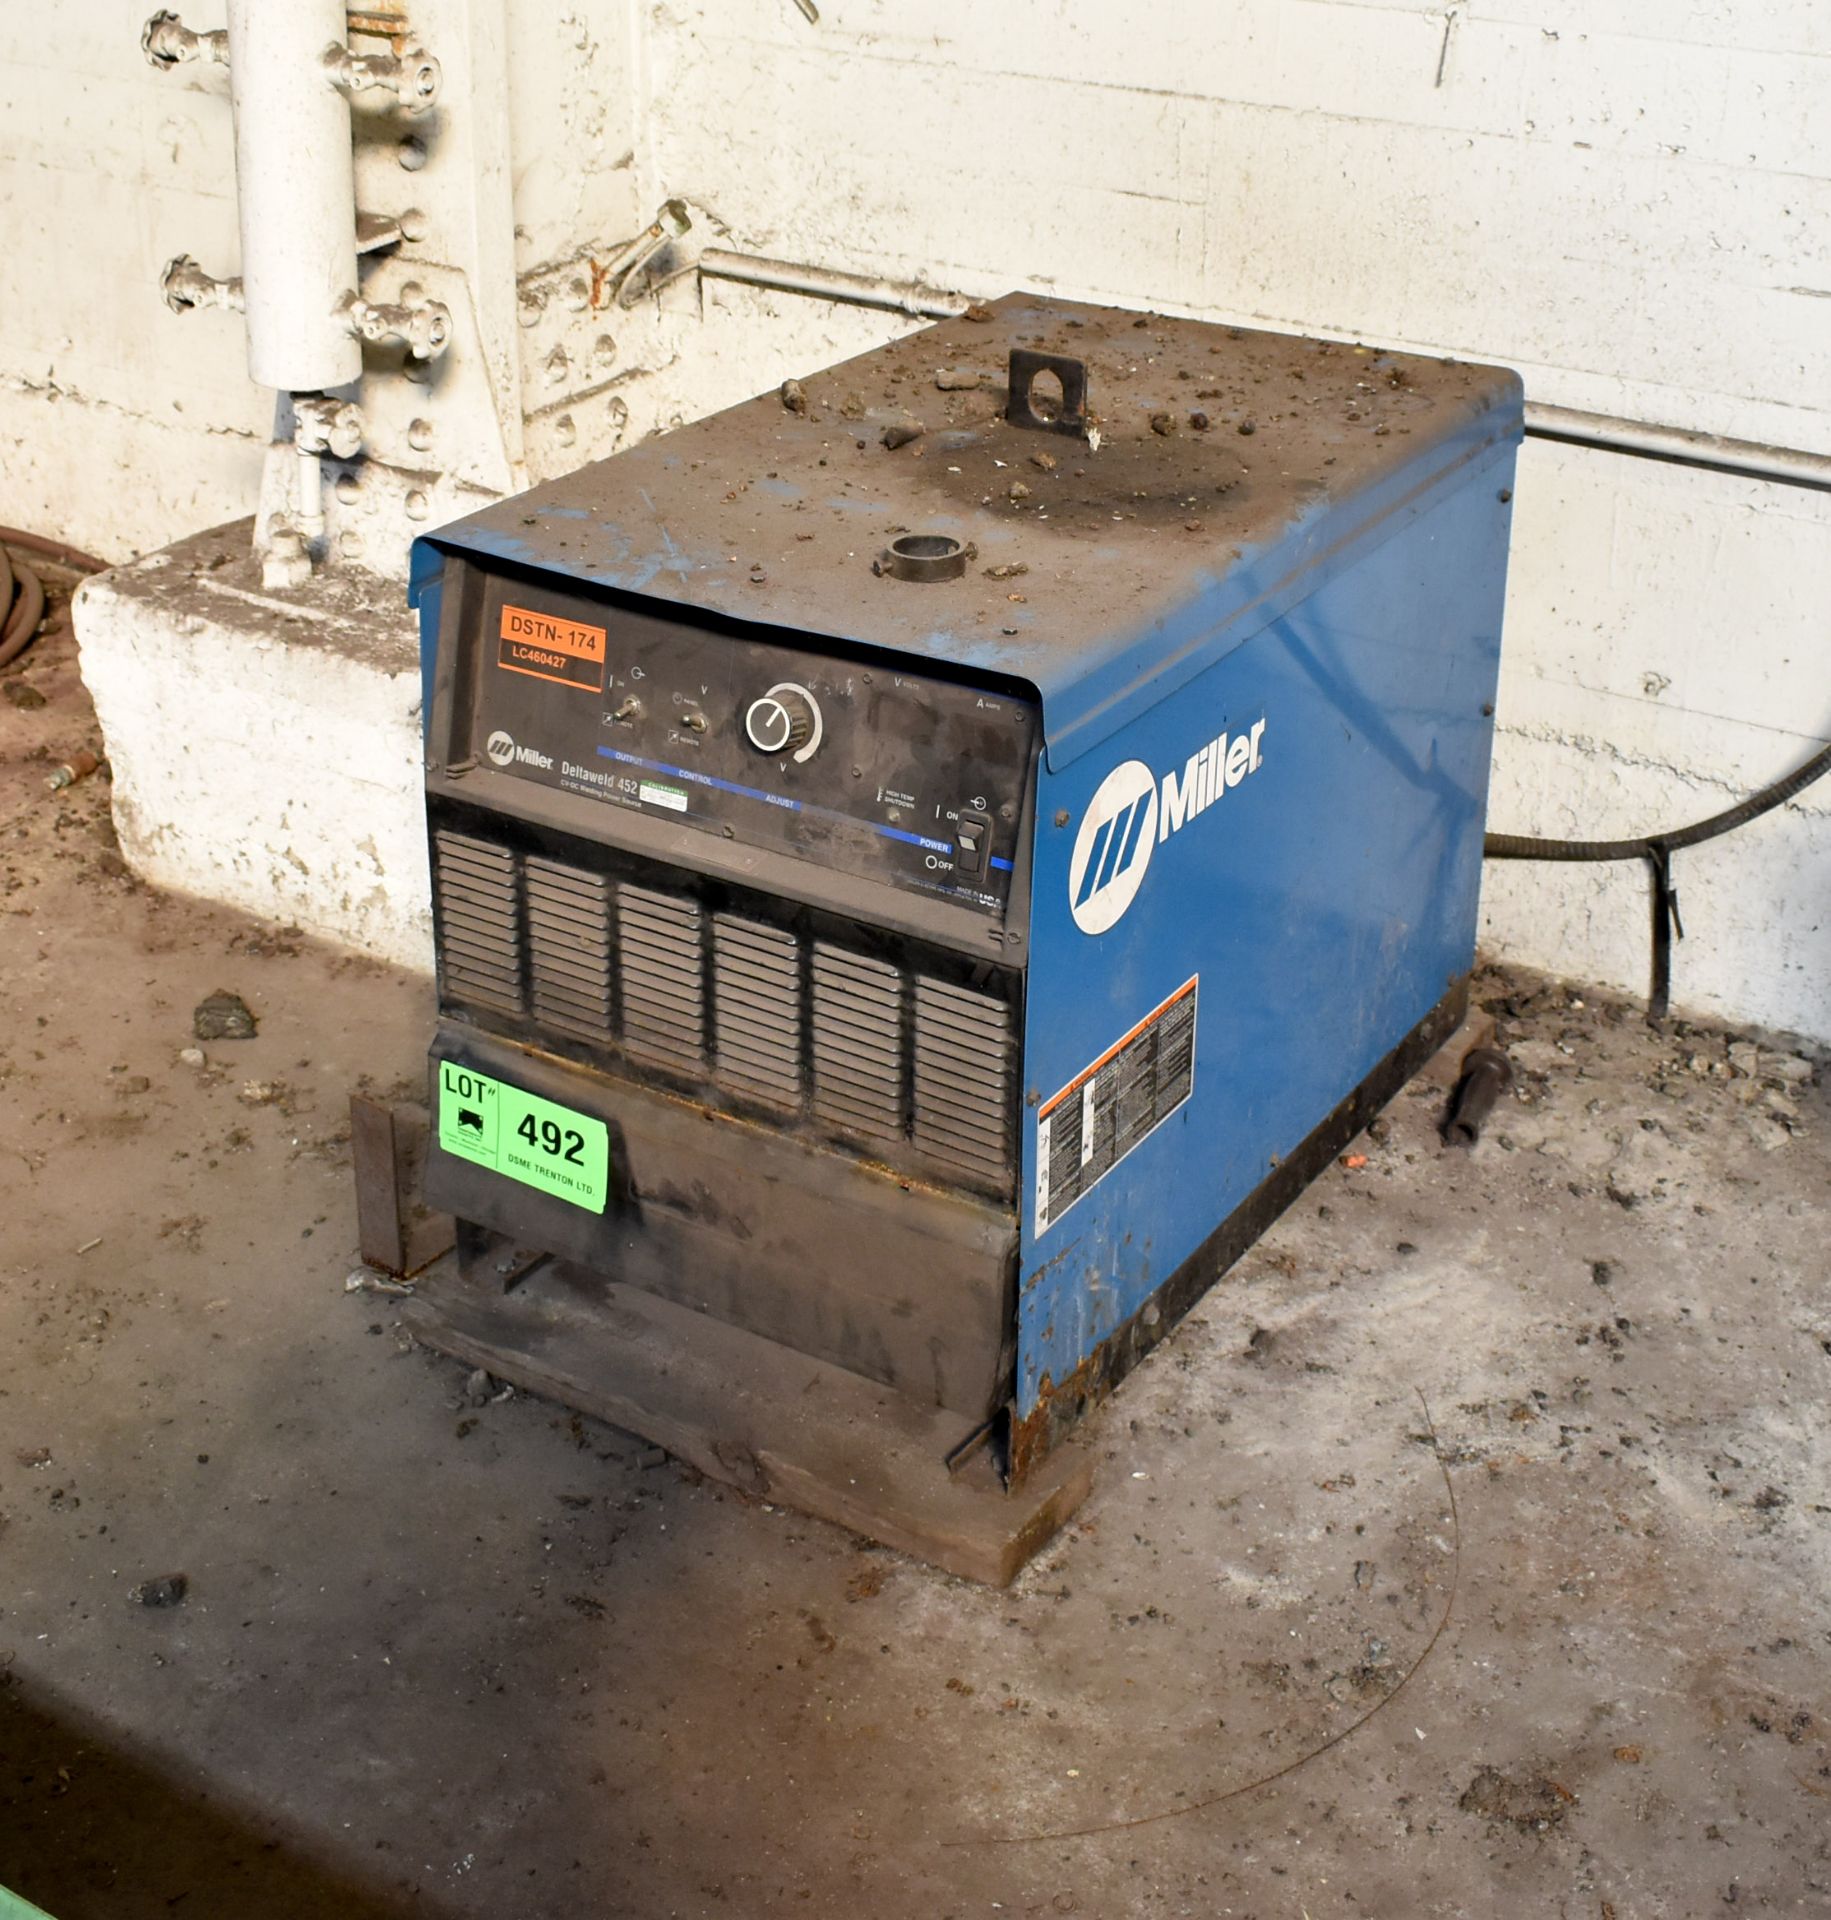 MILLER DELTAWELD 452 WELDING POWER SOURCE (CI) [RIGGING FEE FOR LOT# 492 - $40 USD +PLUS TAXES]